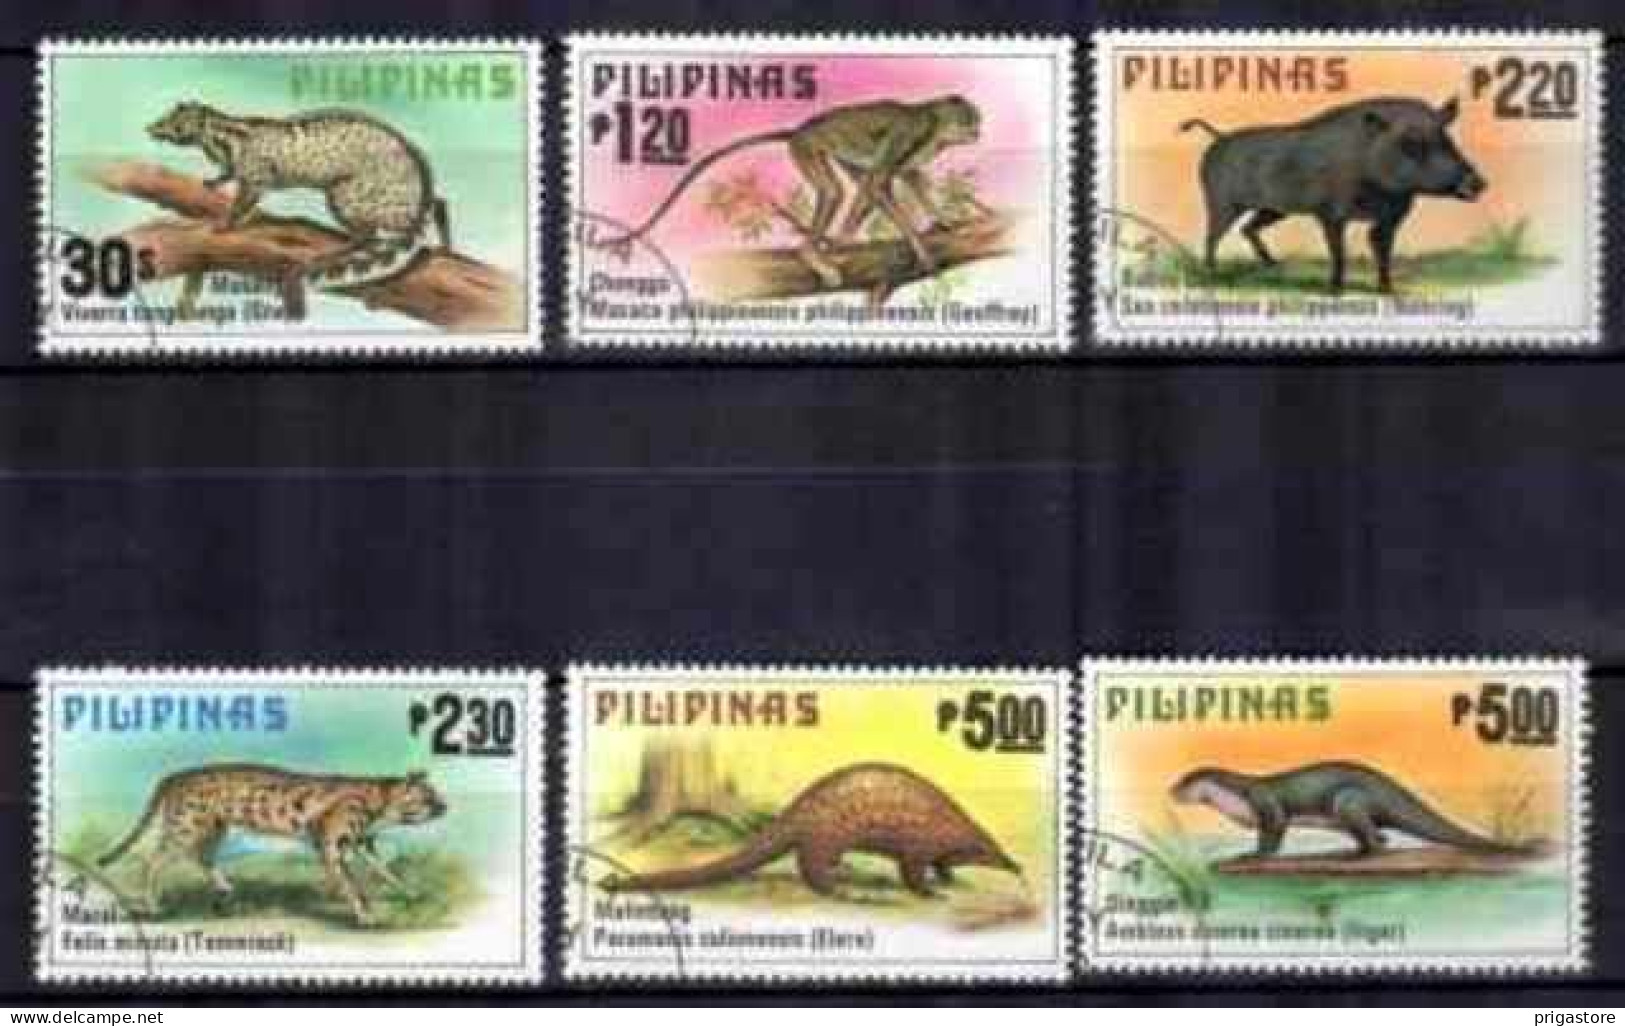 Philippines 1979 Animaux Sauvages (33) Yvert N° 1121 à 1126 Oblitéré Used - Philippines